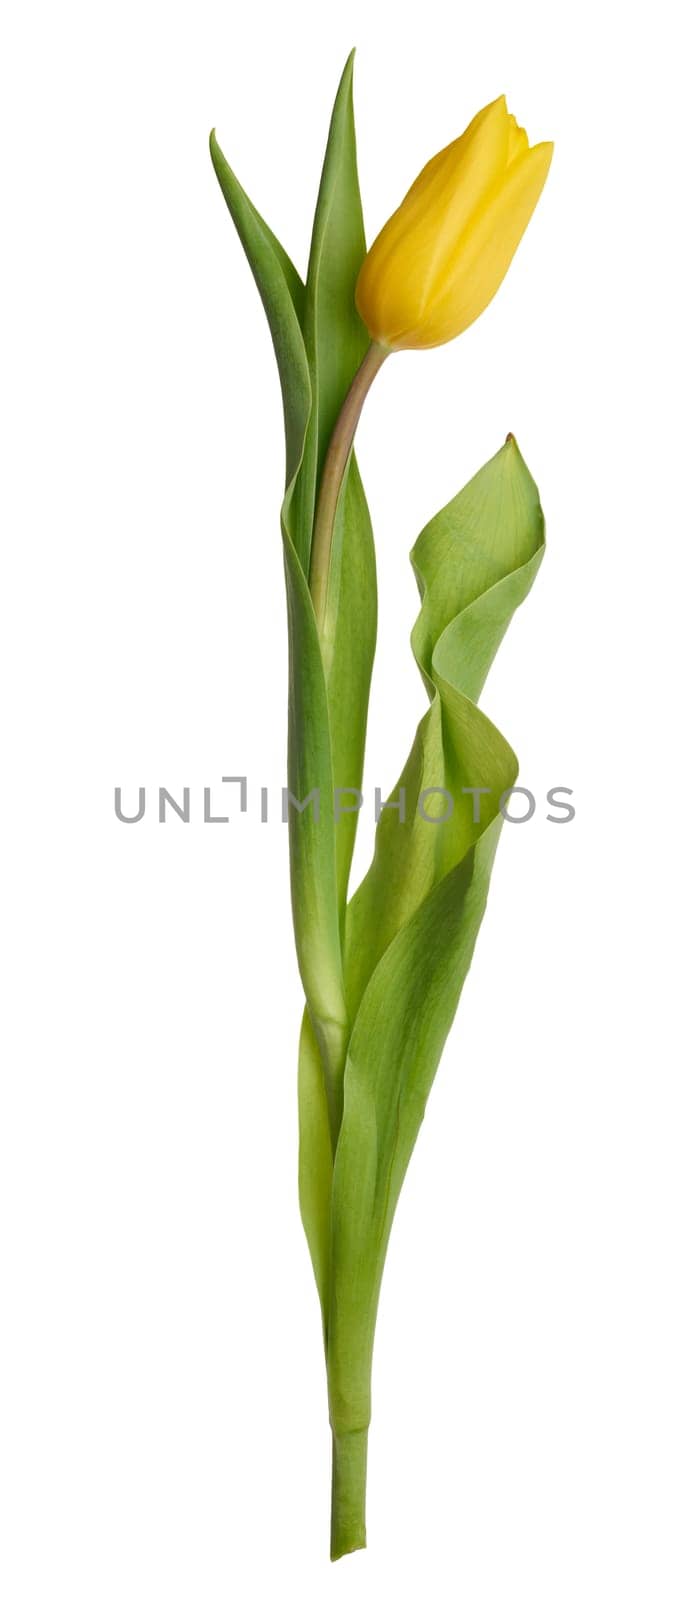 Yellow blooming tulip with green leaves on isolated background by ndanko